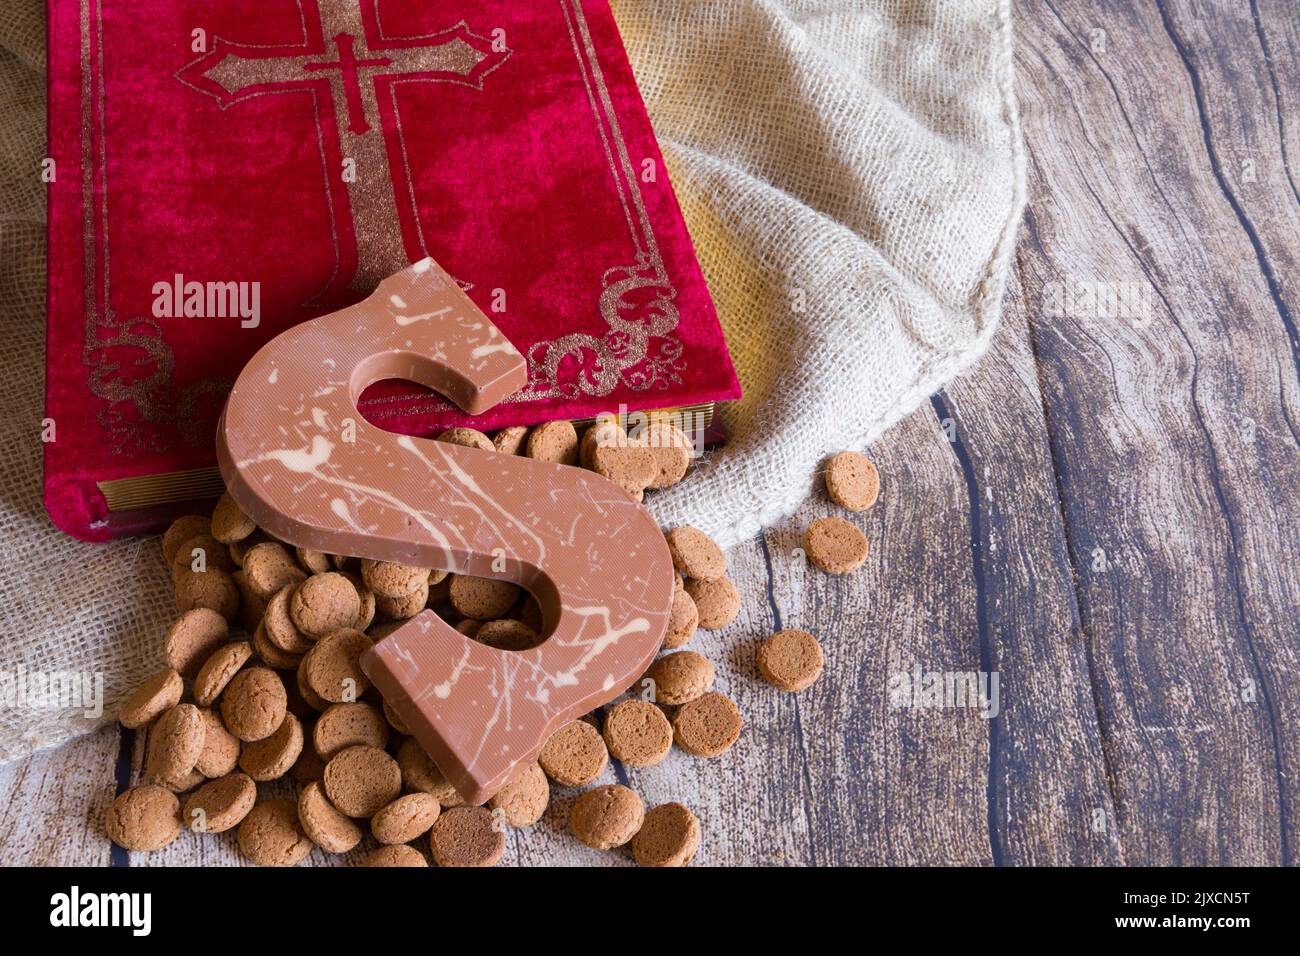 Dutch Sinterklaas tradition: A chocolate letter, the bookof Sinterklaas , a bag and candy called Pepernoten. Stock Photo